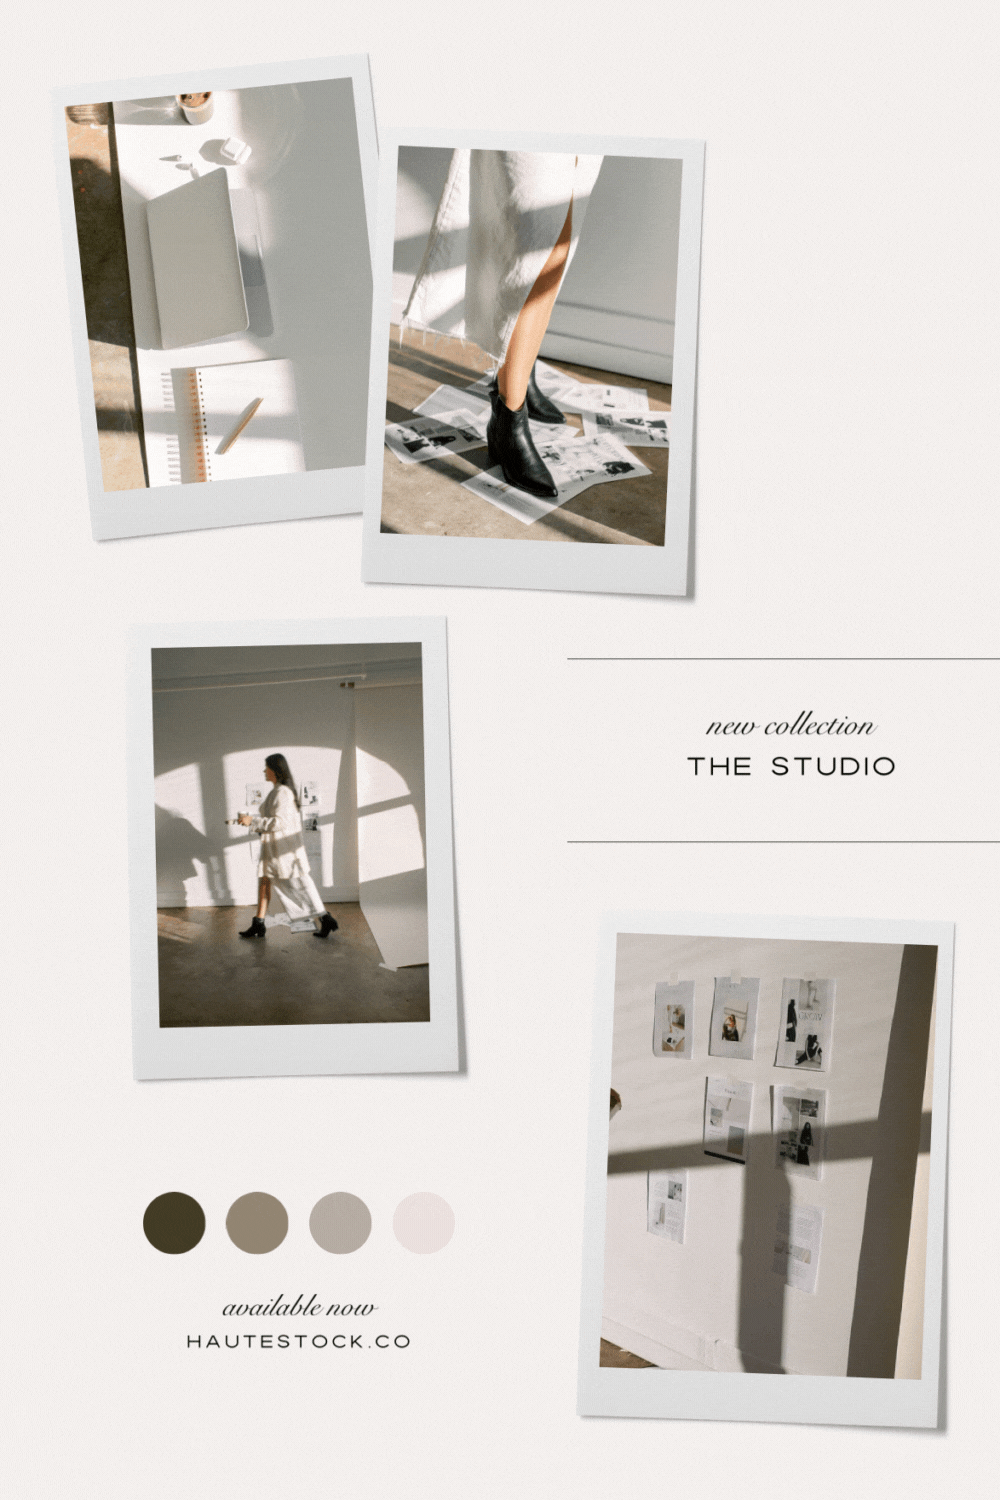 Moodboard for Haute Stock's newest collection, the Studio. An elevated workspace stock photos and videos for creative designers